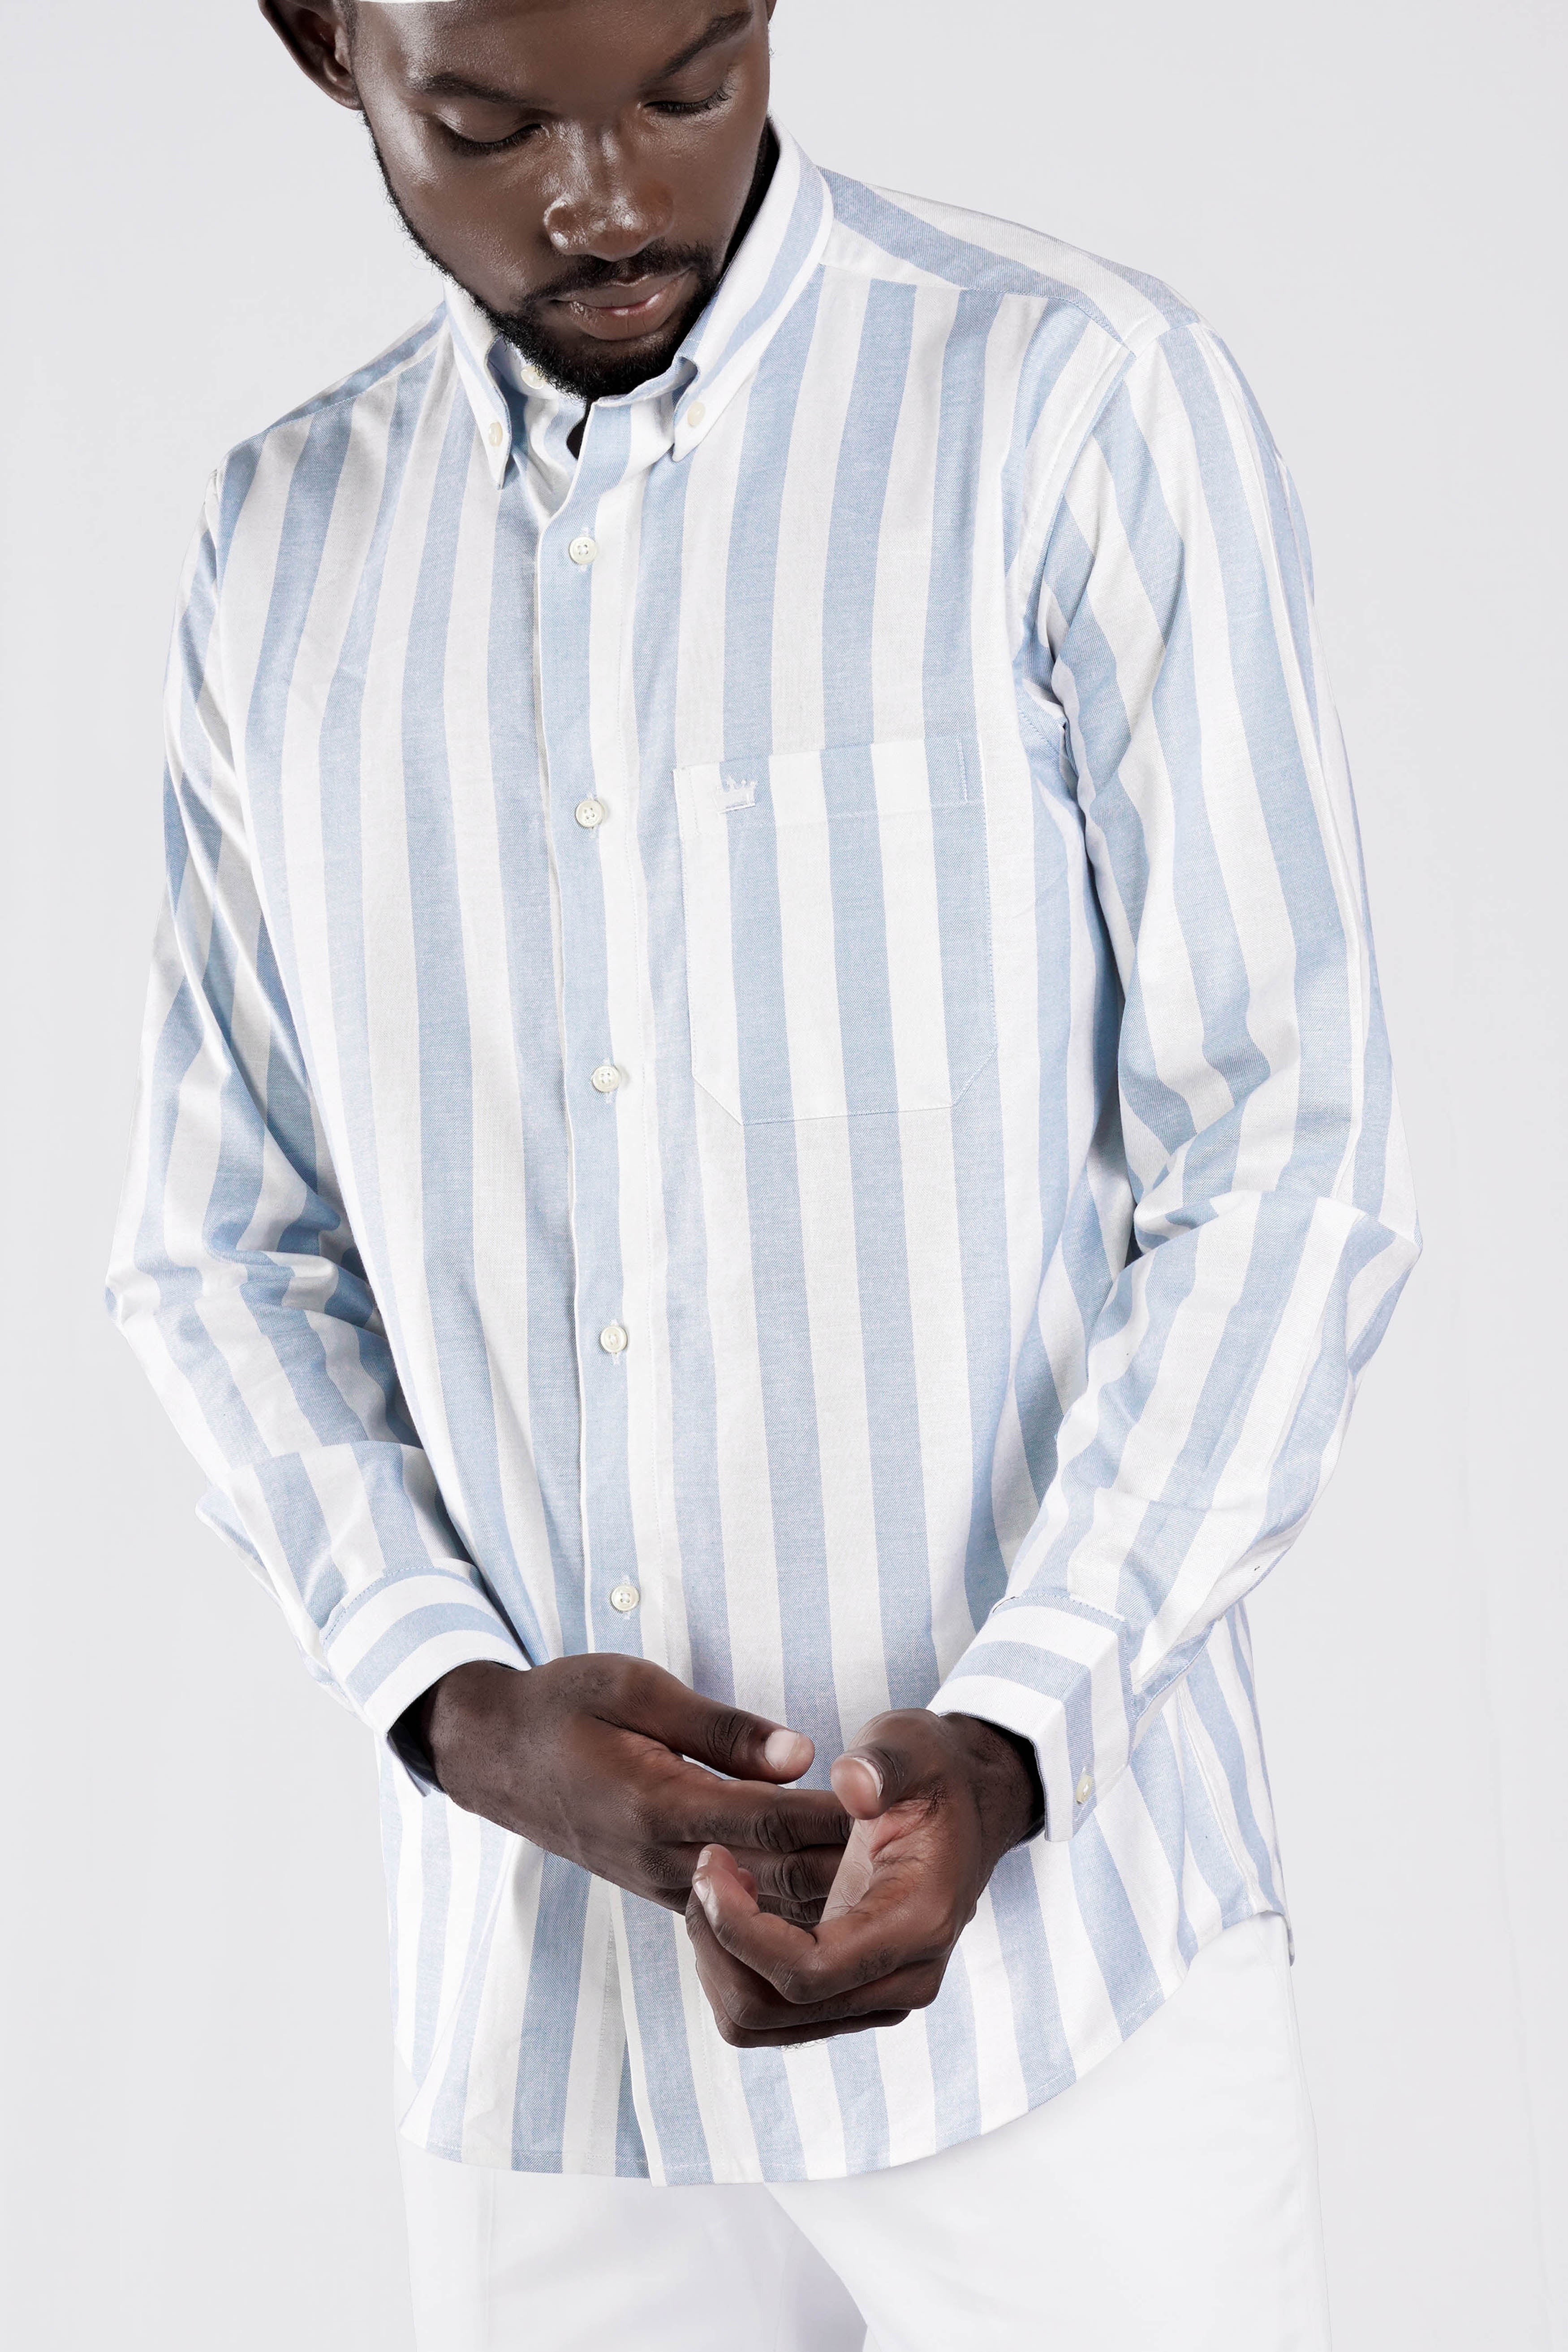 Periwinkle Blue and White Striped Royal Oxford Shirt